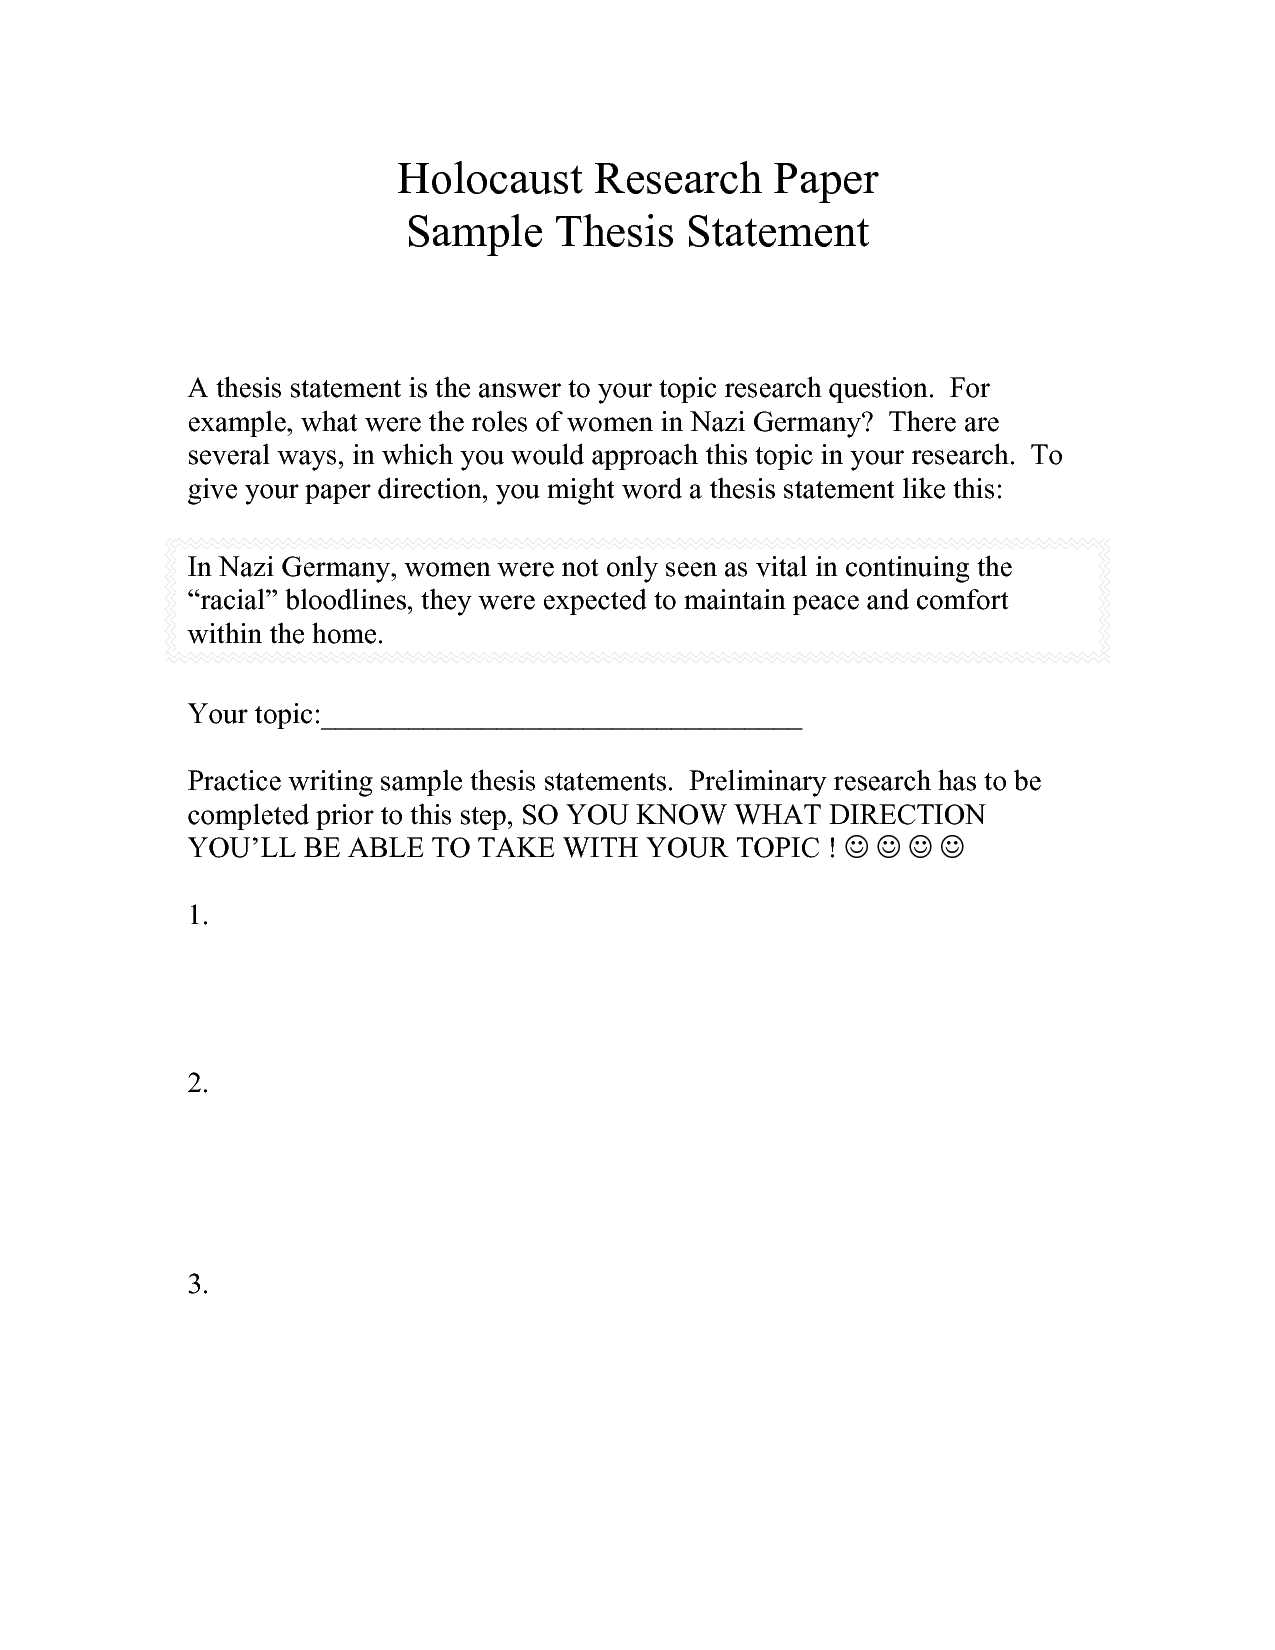 How to Write a Thesis Statement for a Research Paper: 5 Tips